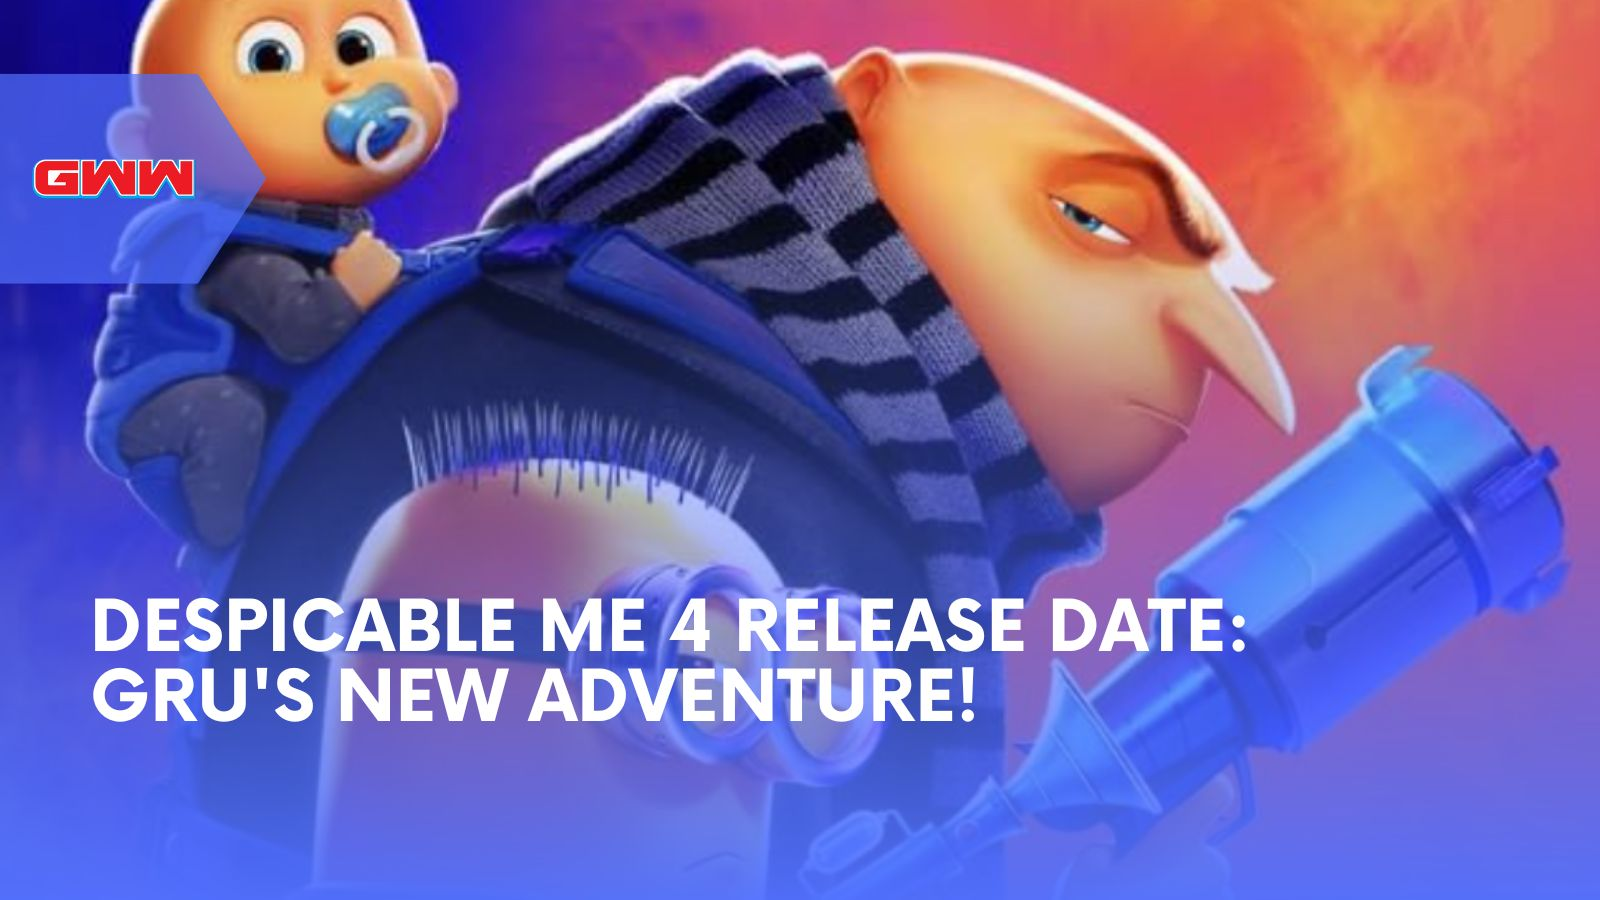 Despicable Me 4 Release Date: Gru's New Adventure!